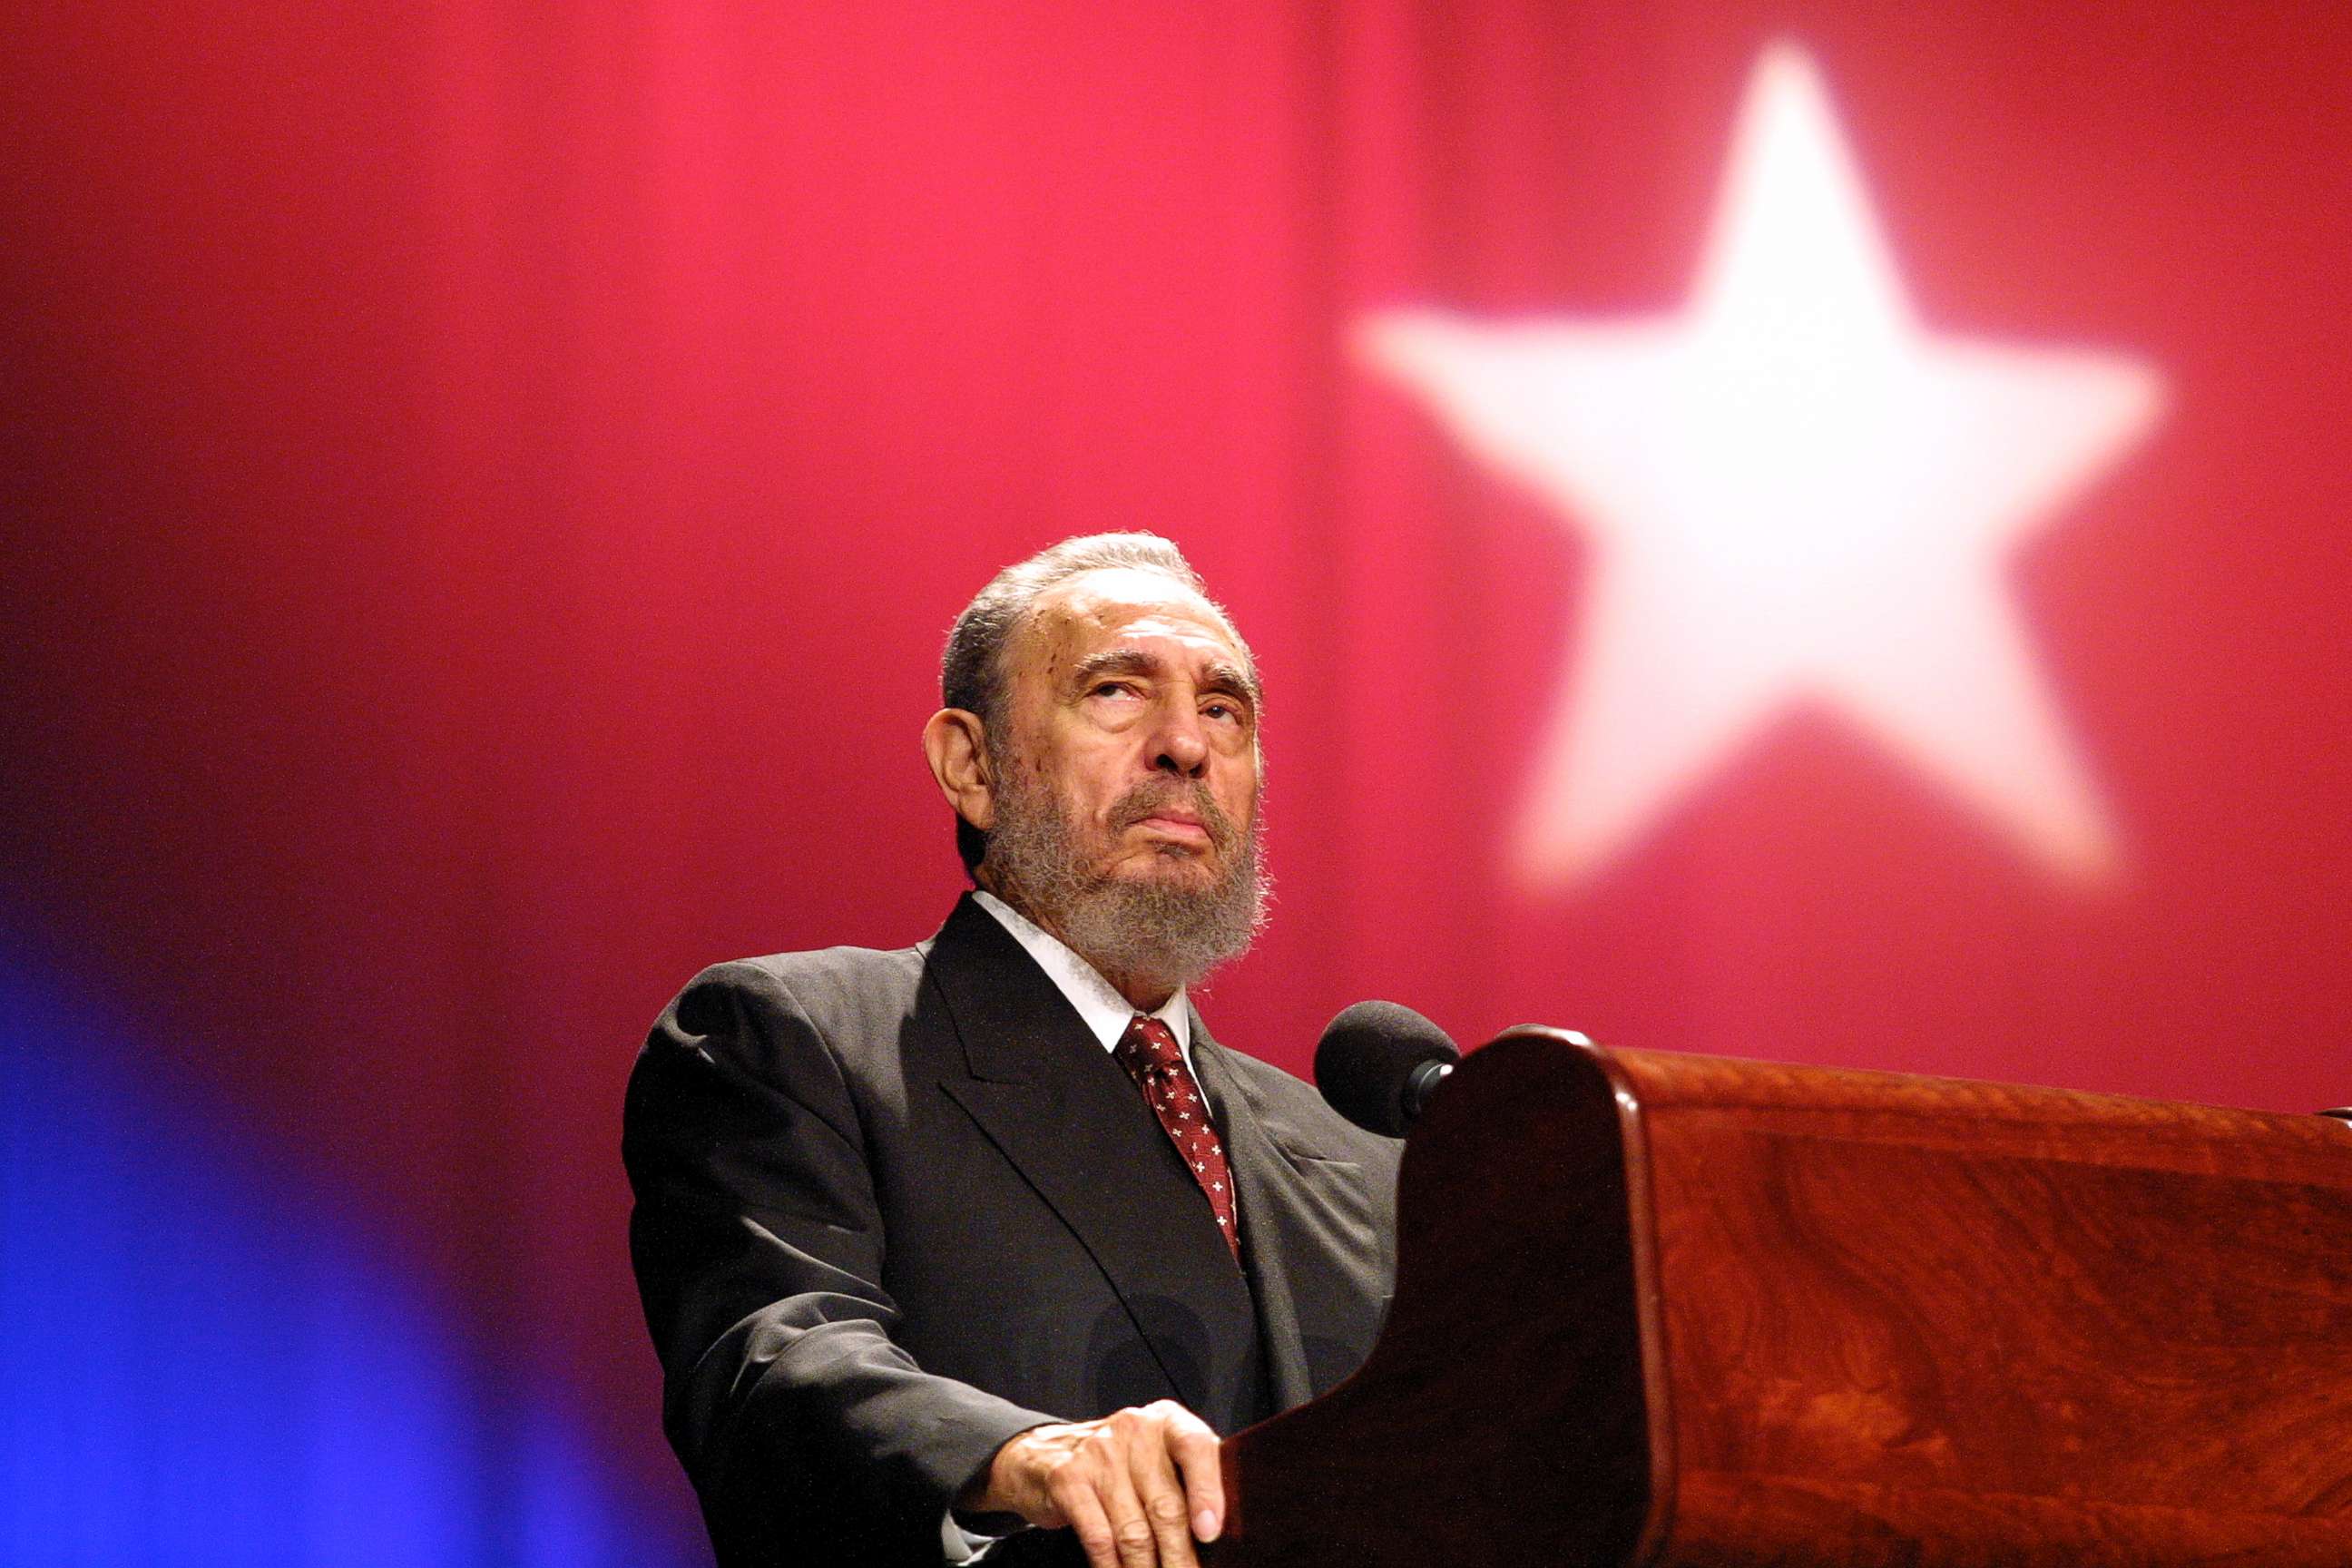 PHOTO: Fidel Castro speaks during a ceremony celebrating the inauguration of emergency classes for high school teachers in the President Salvador Allende school, in the Karl Marx Theatre in this Sept. 9, 2002 file photo in Havana, Cuba.